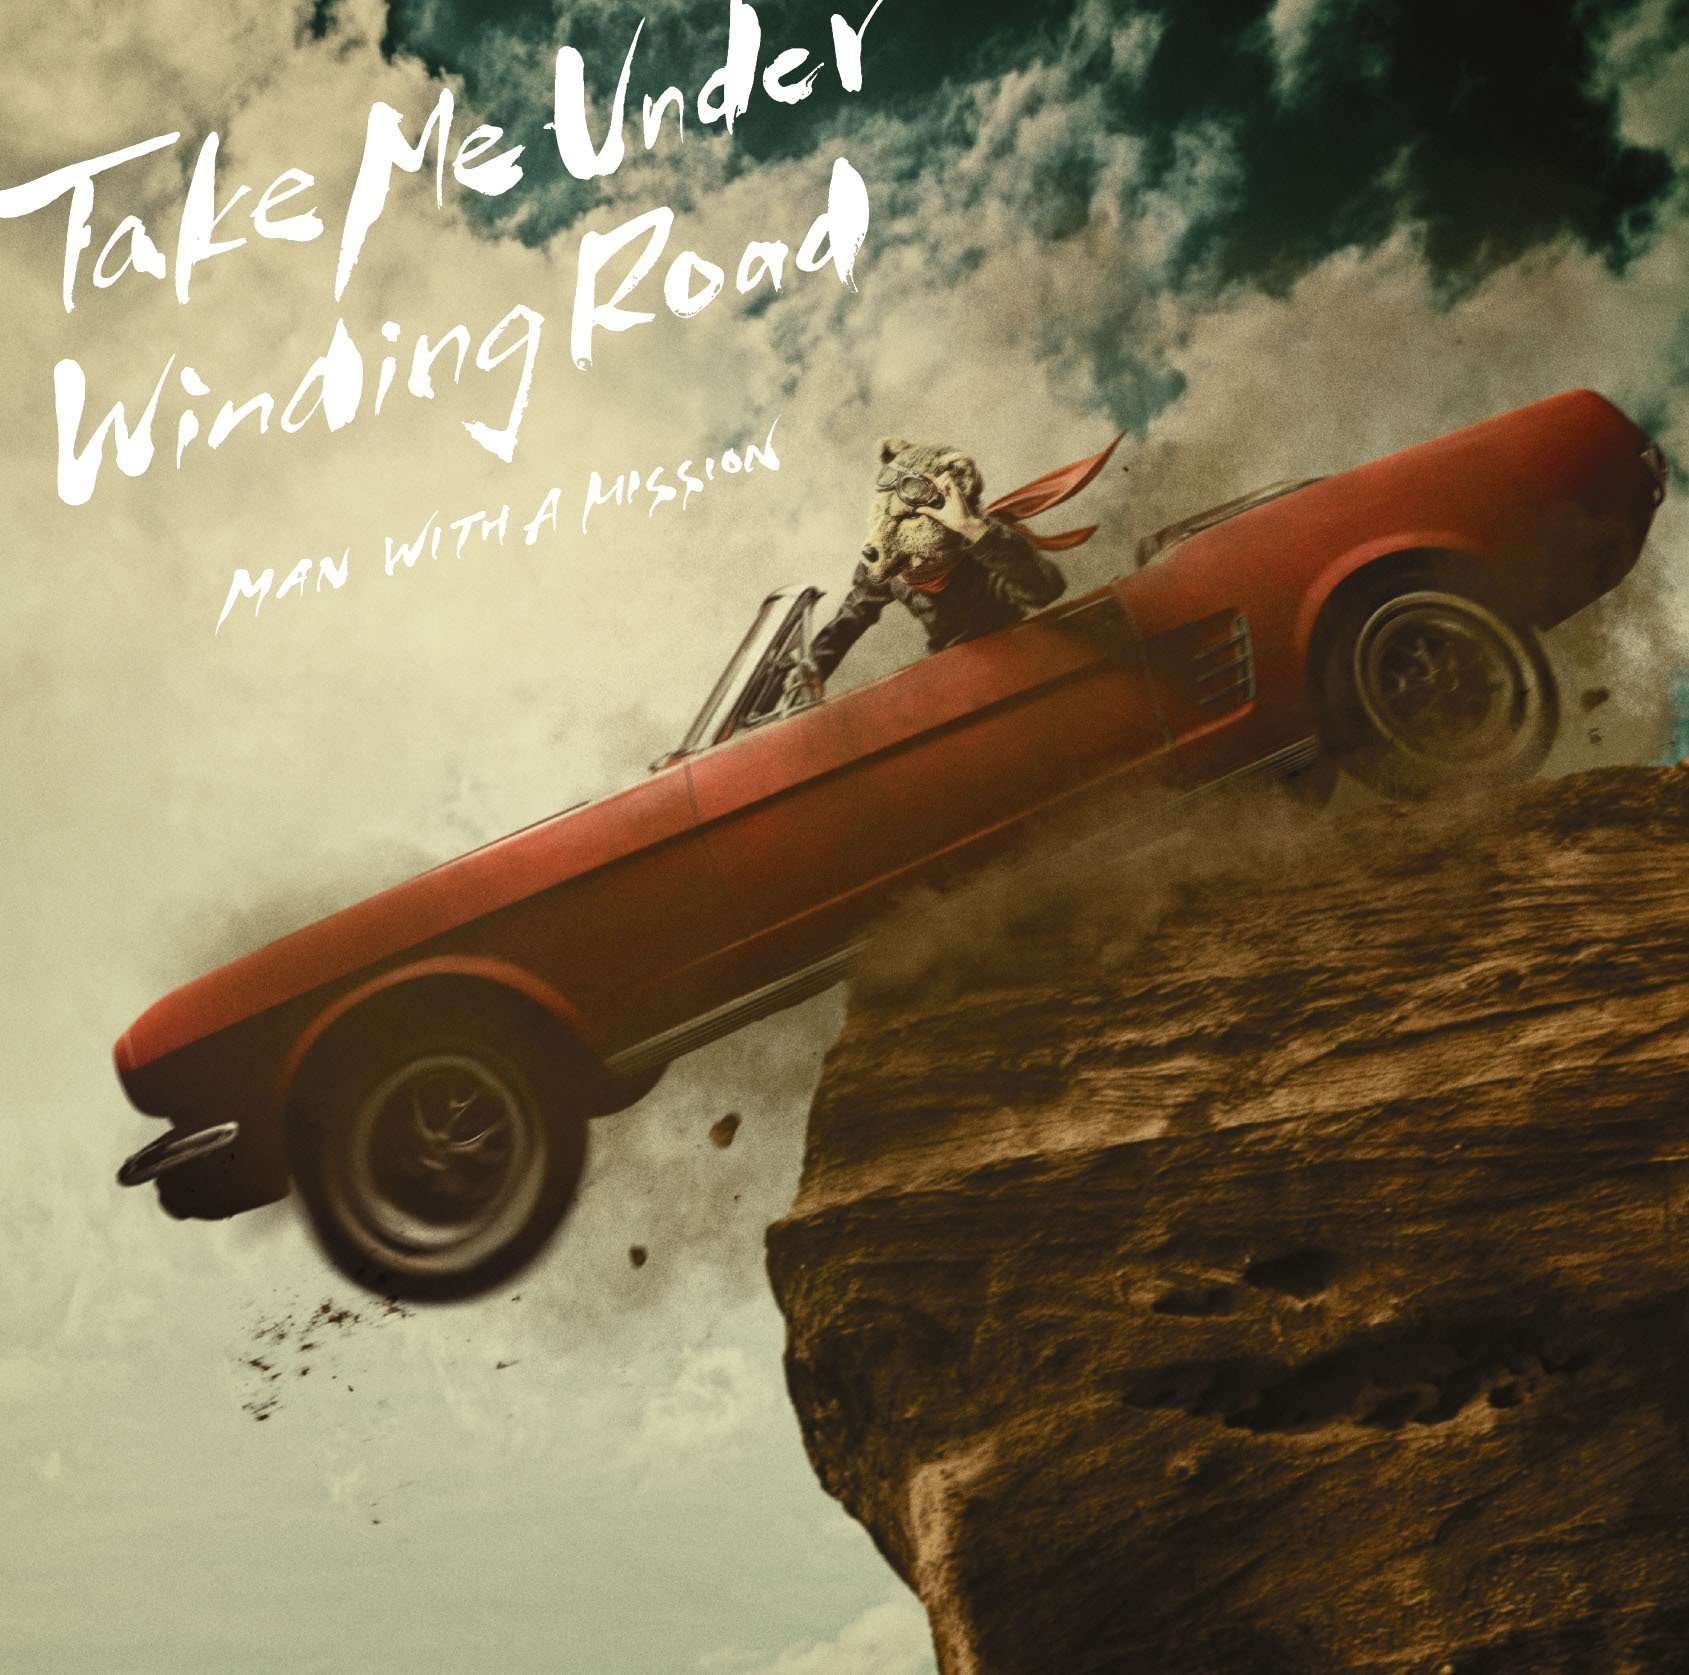 MAN WITH A MISSION - Take Me Under / Winding Road [Mora FLAC 24bit/48kHz]